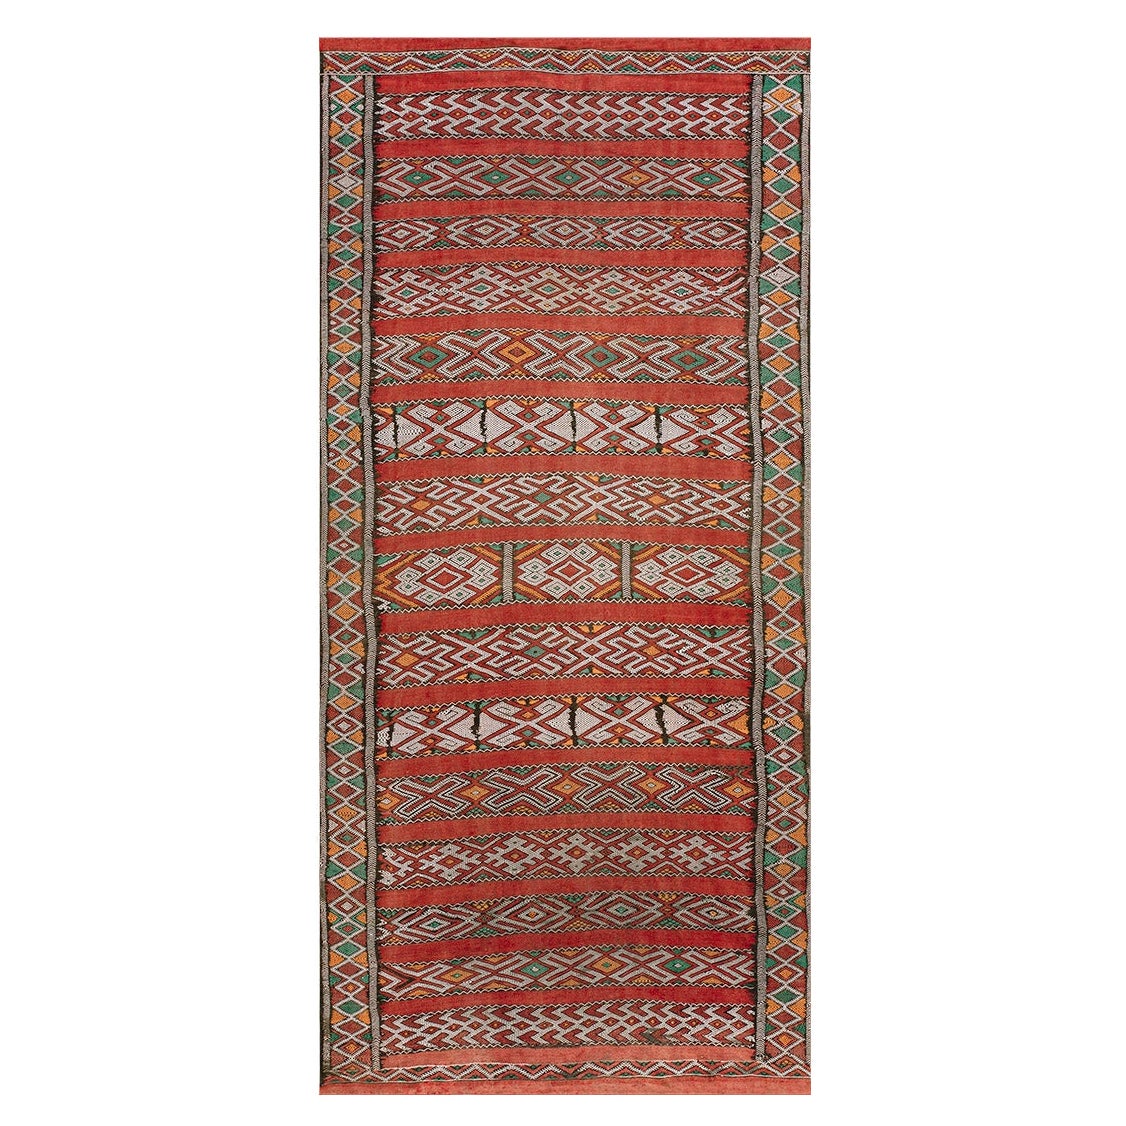 Mid 20th Century Moroccan Flat-weave Carpet ( 5' x 10'3" - 152 x 312 ) For Sale